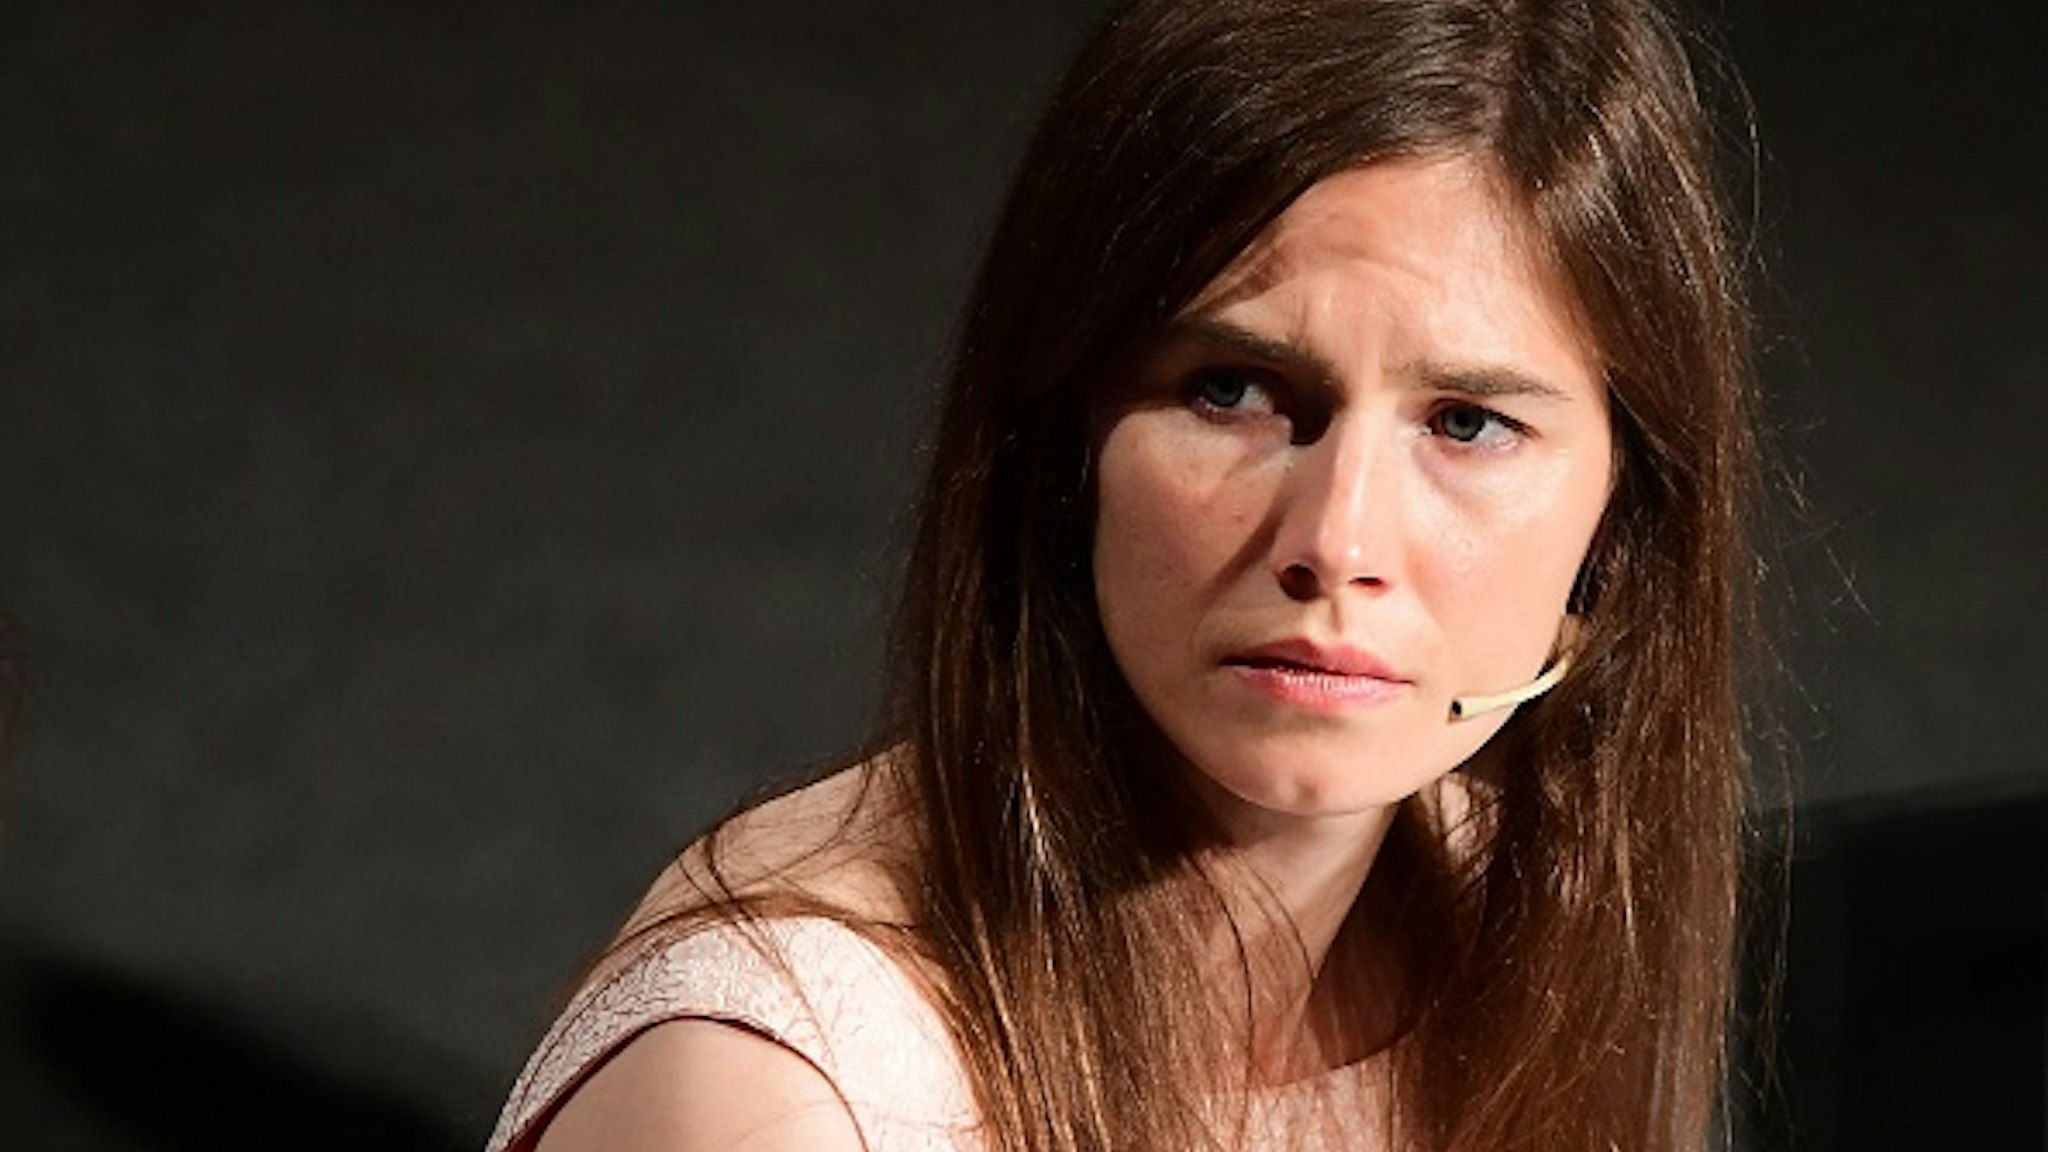 US journalist Amanda Knox attends a panel discussion titled "Trial by Media" during the Criminal Justice Festival at the Law University of Modena, northern Italy on June 15, 2019. - Knox returns to Italy for the first time since the US student was acquitted in 2015 of the gruesome killing of her British housemate after spending four years behind bars. The Seattle native, now 31, was 20-years-old at the time of the murder of Briton Meredith Kercher, a fellow exchange student whose half-naked body was found on November 2, 2007, in a bedroom of the apartment she and Knox shared in the central city of Perugia.